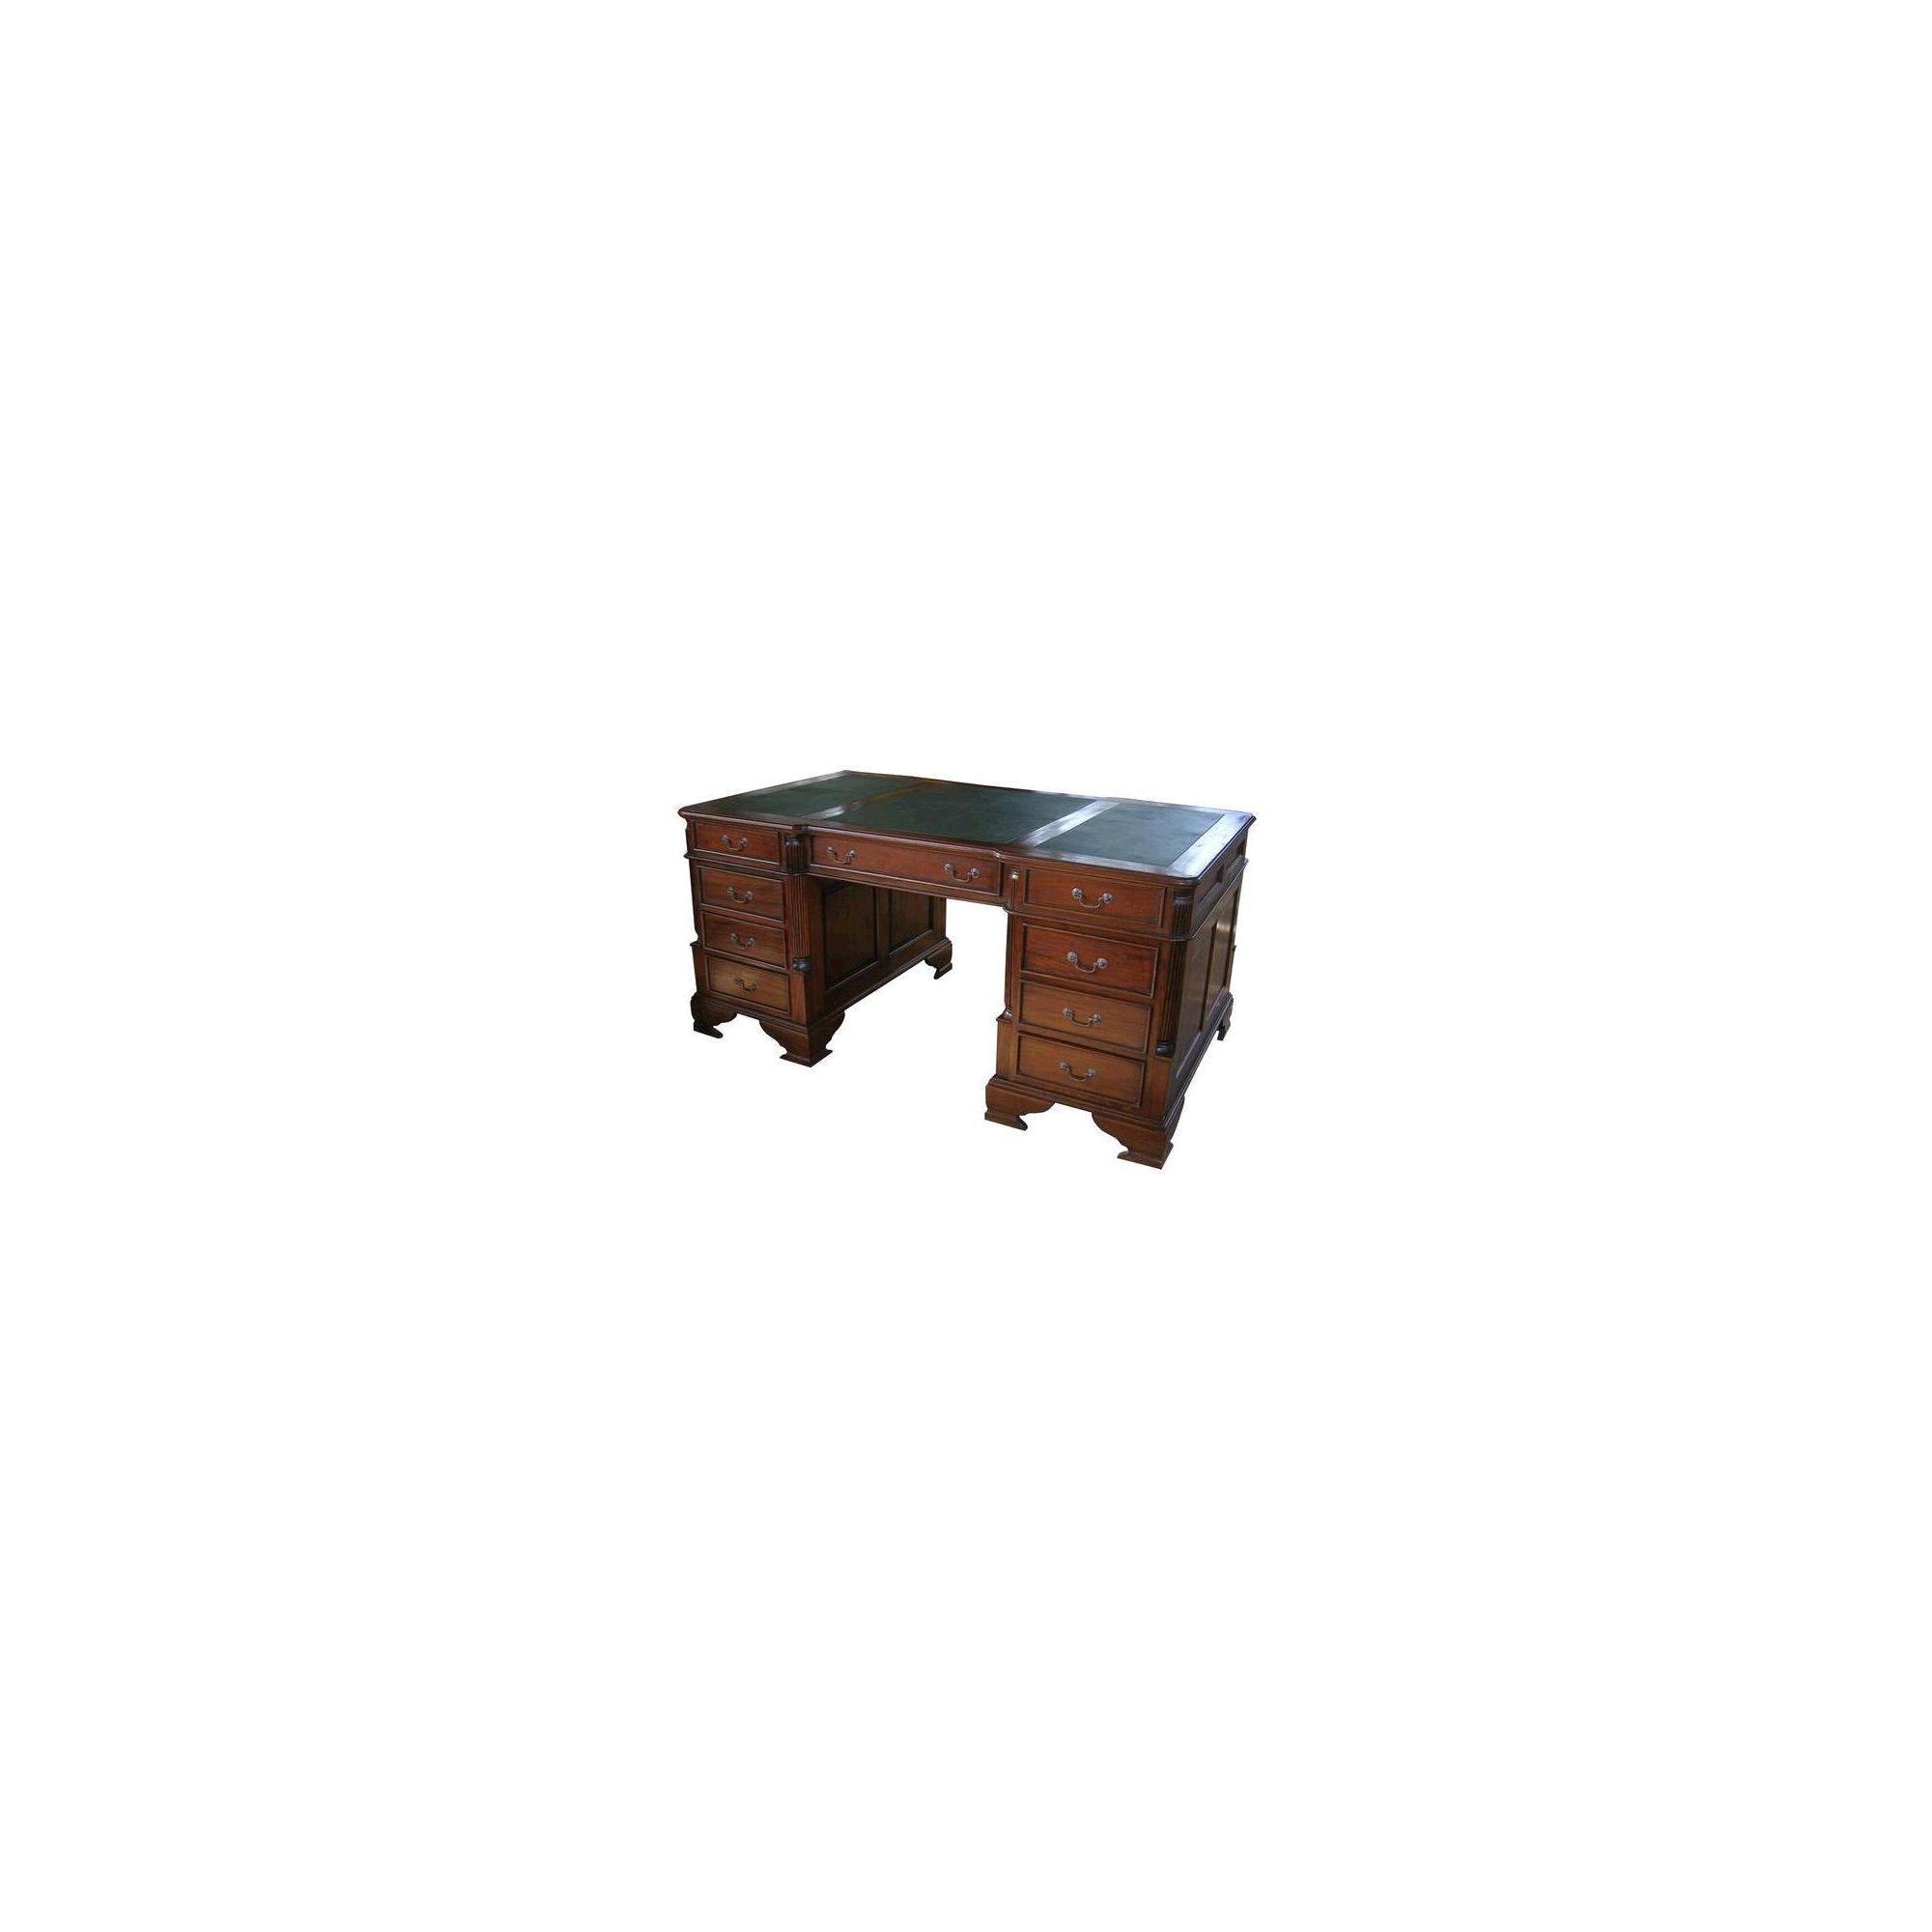 Lock stock and barrel Mahogany Large Partners Desk with Leather Top in Mahogany at Tesco Direct